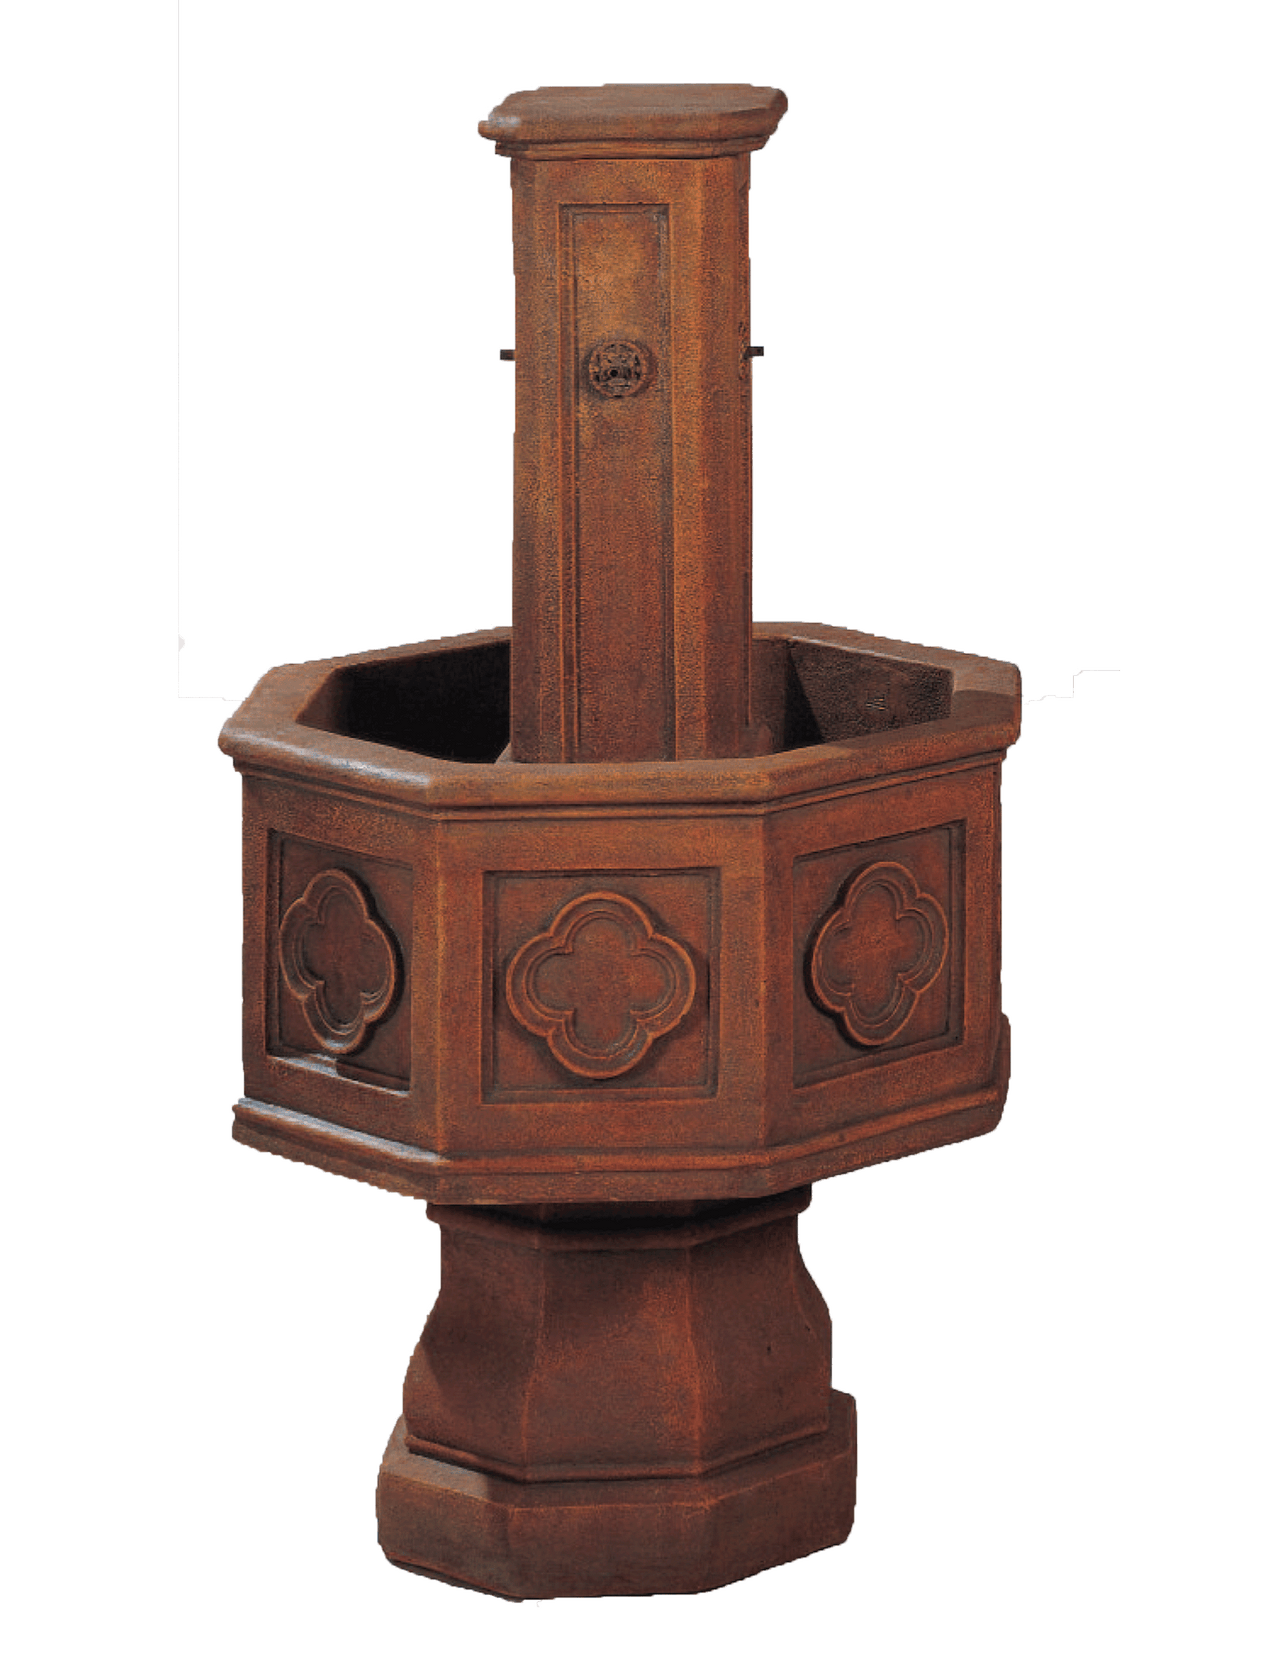 Gothica Cast Stone Outdoor Garden Fountains With Spout Fountain Tuscan 